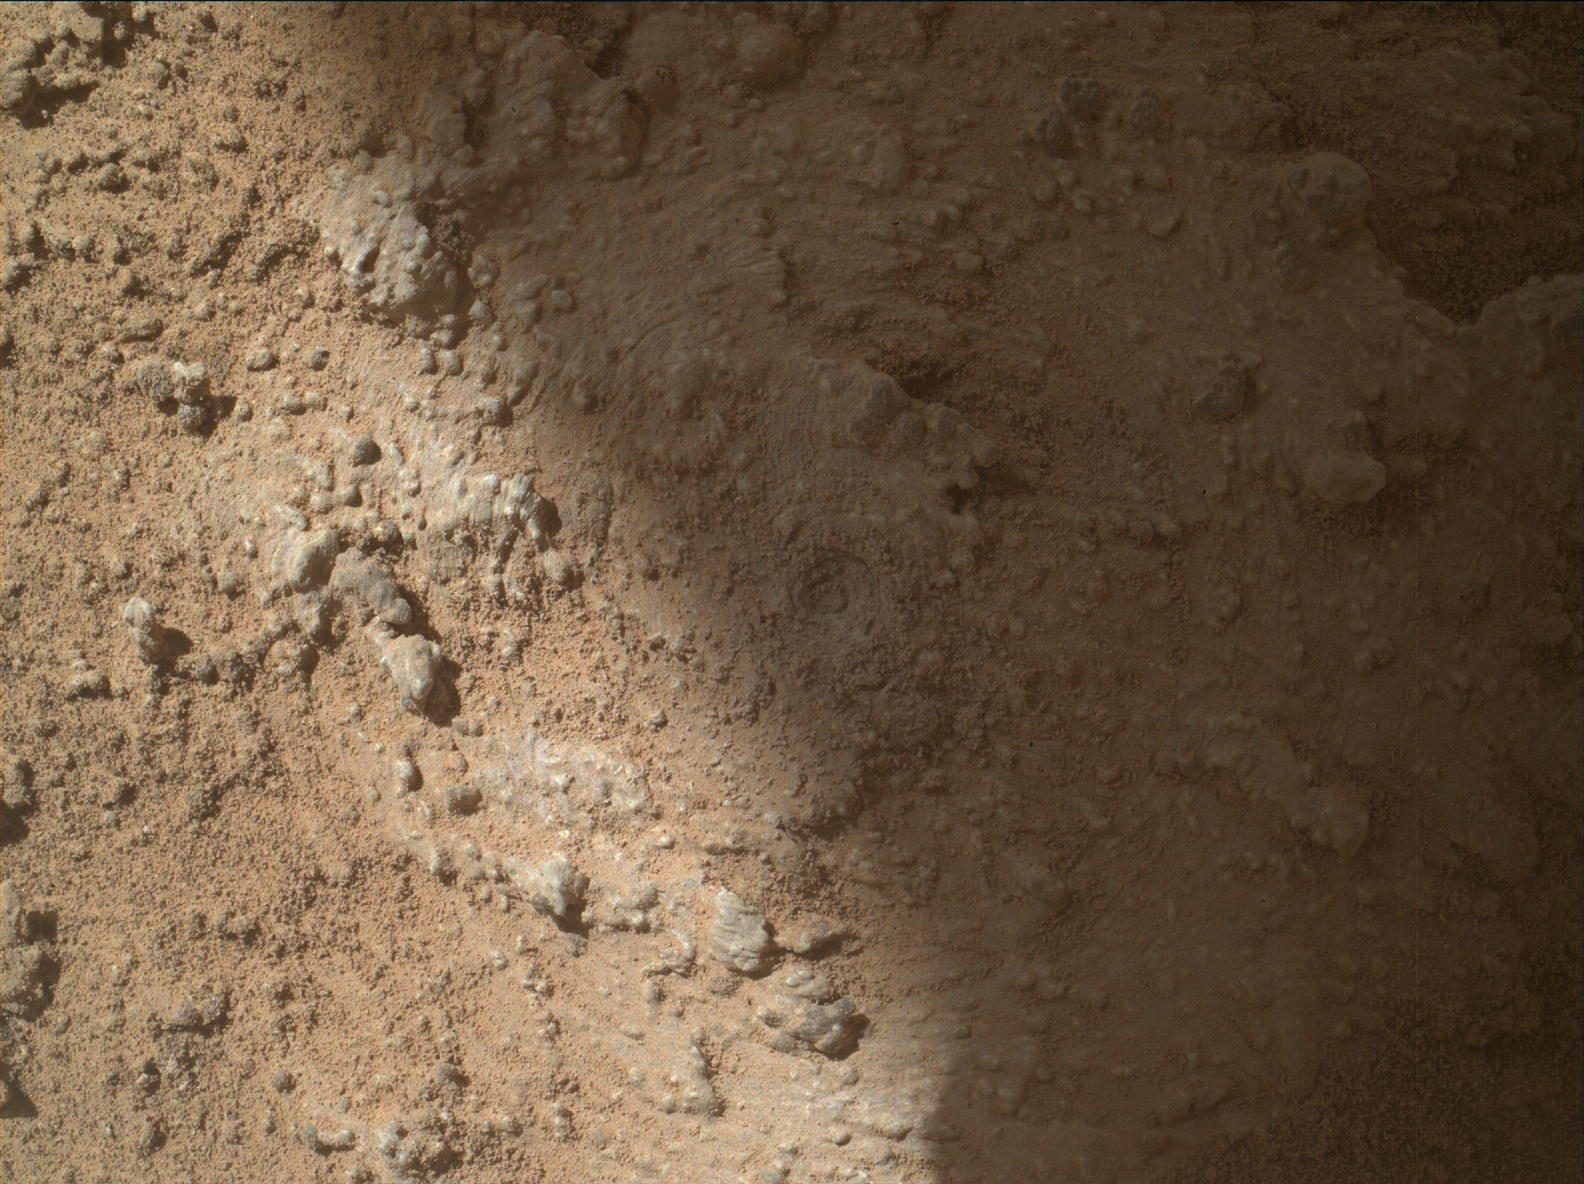 Nasa's Mars rover Curiosity acquired this image using its Mars Hand Lens Imager (MAHLI) on Sol 3871